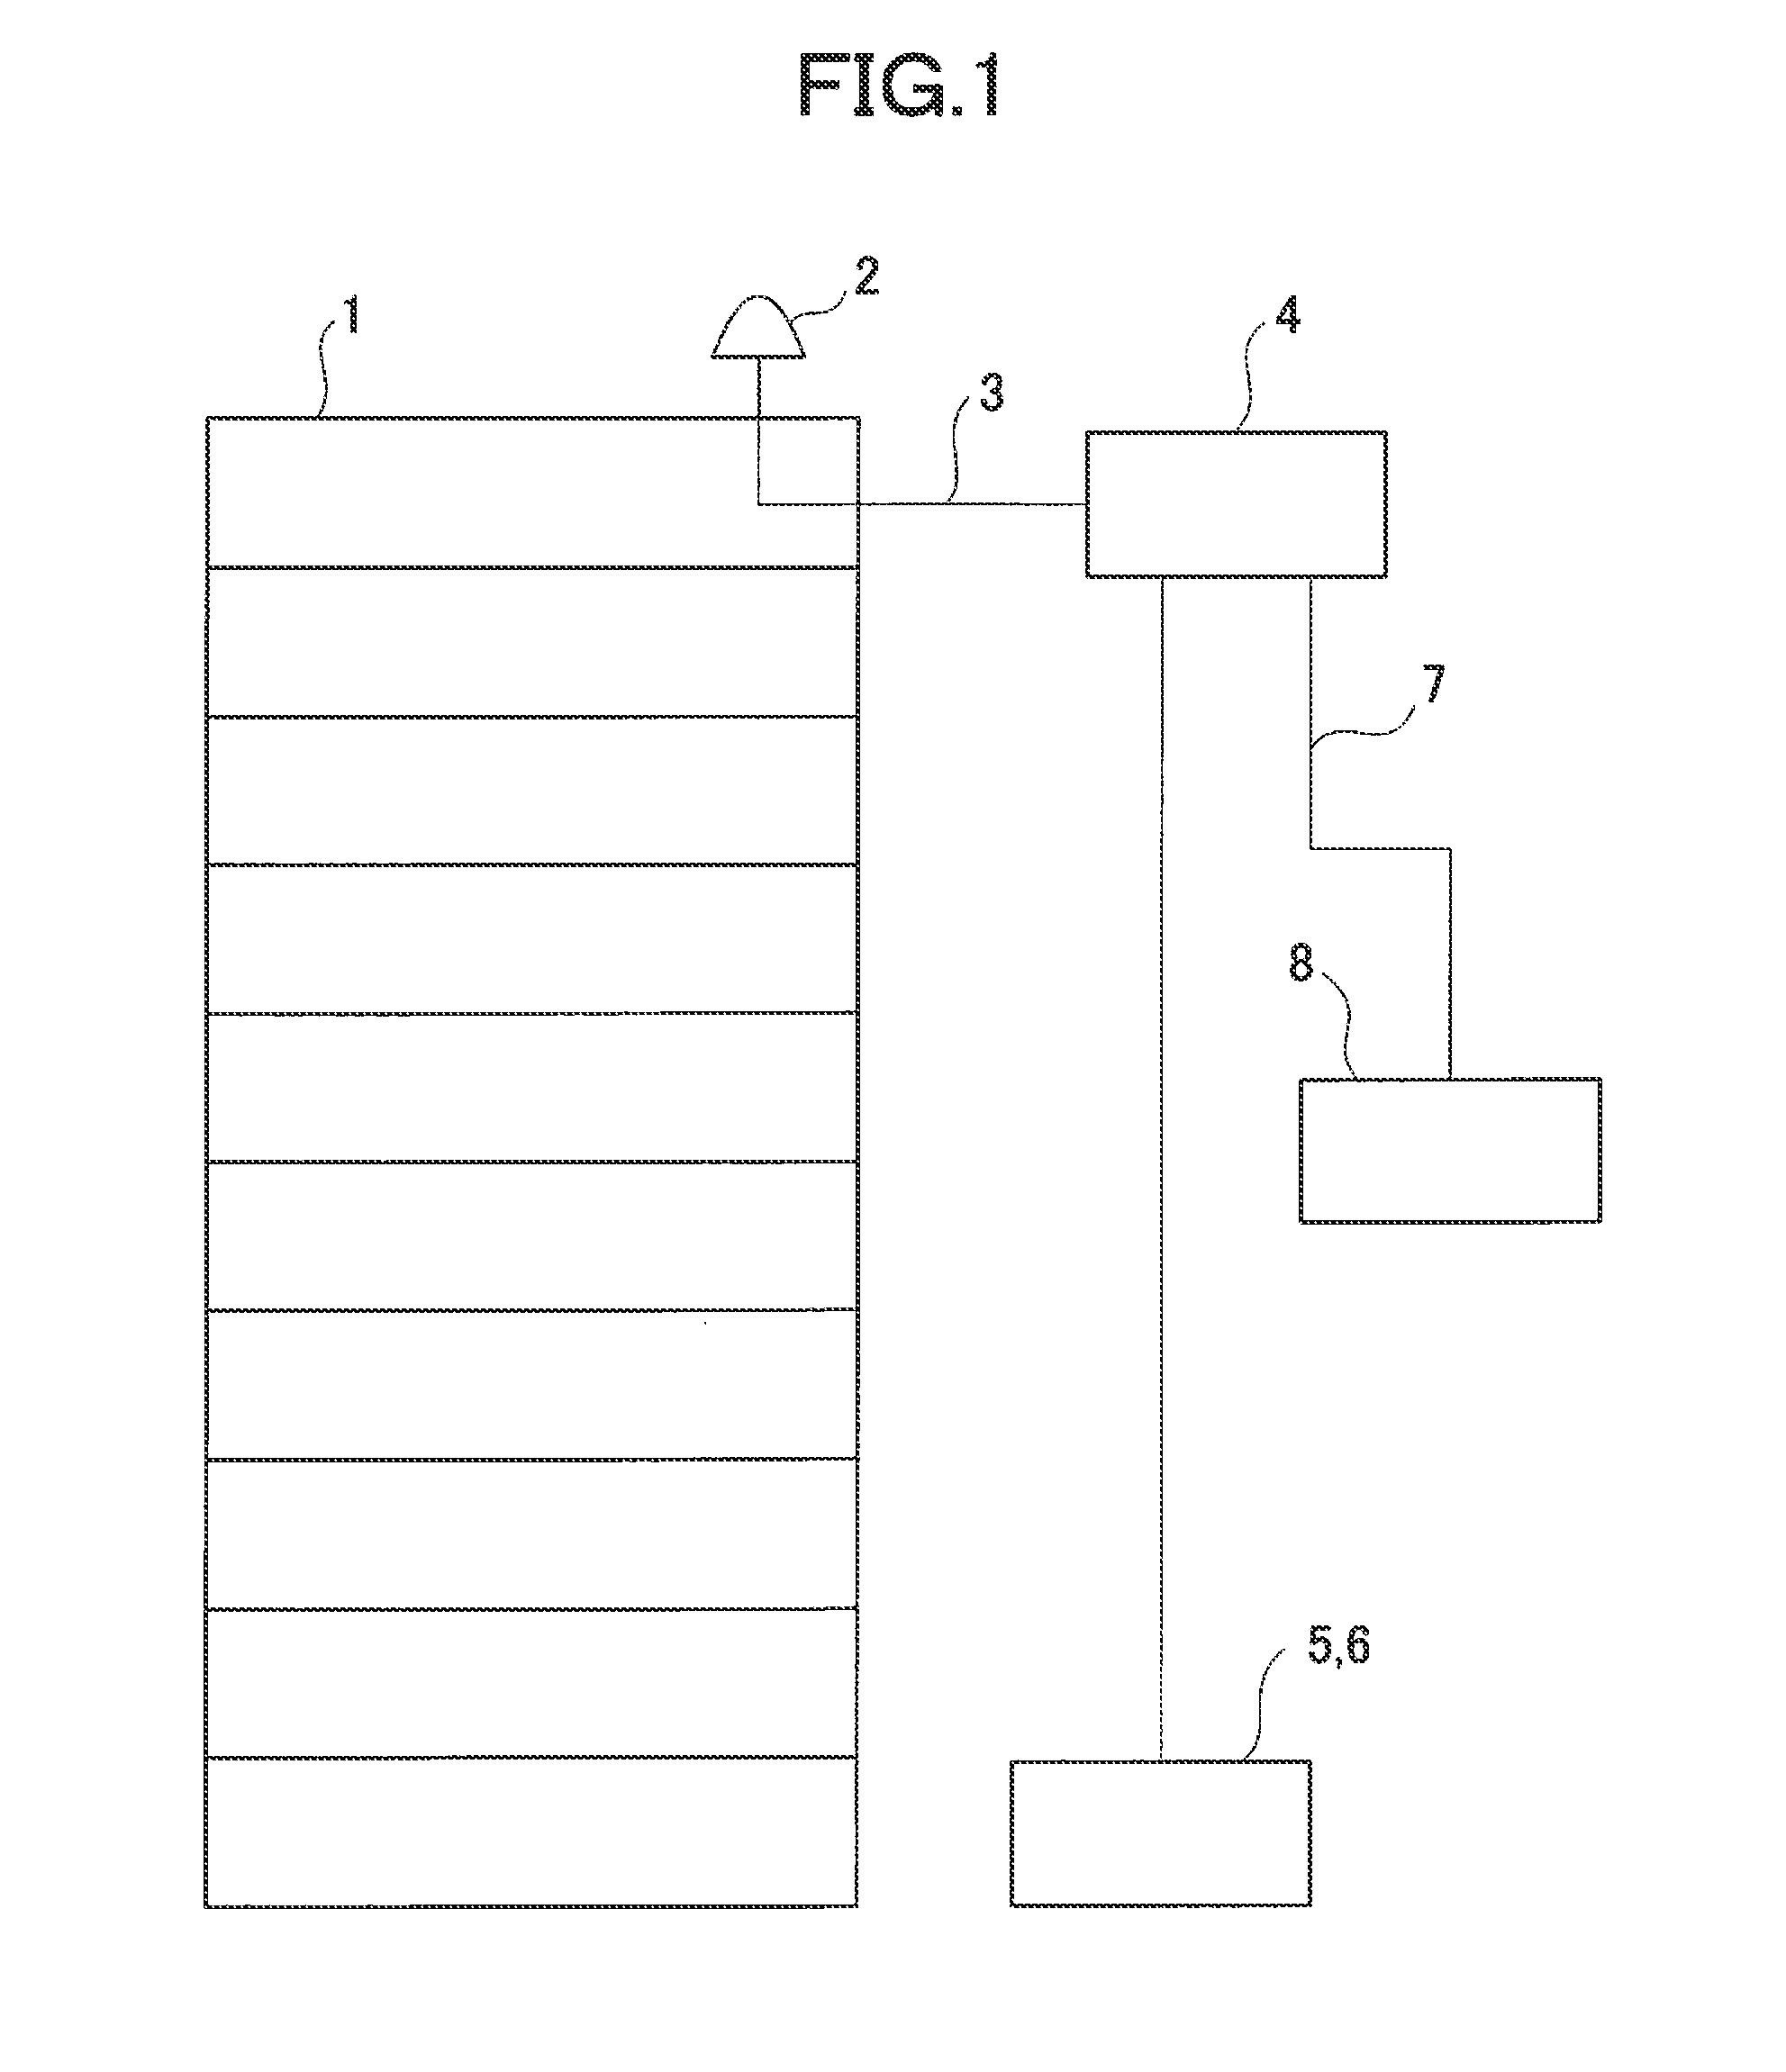 Safety Diagnosis System For Structure